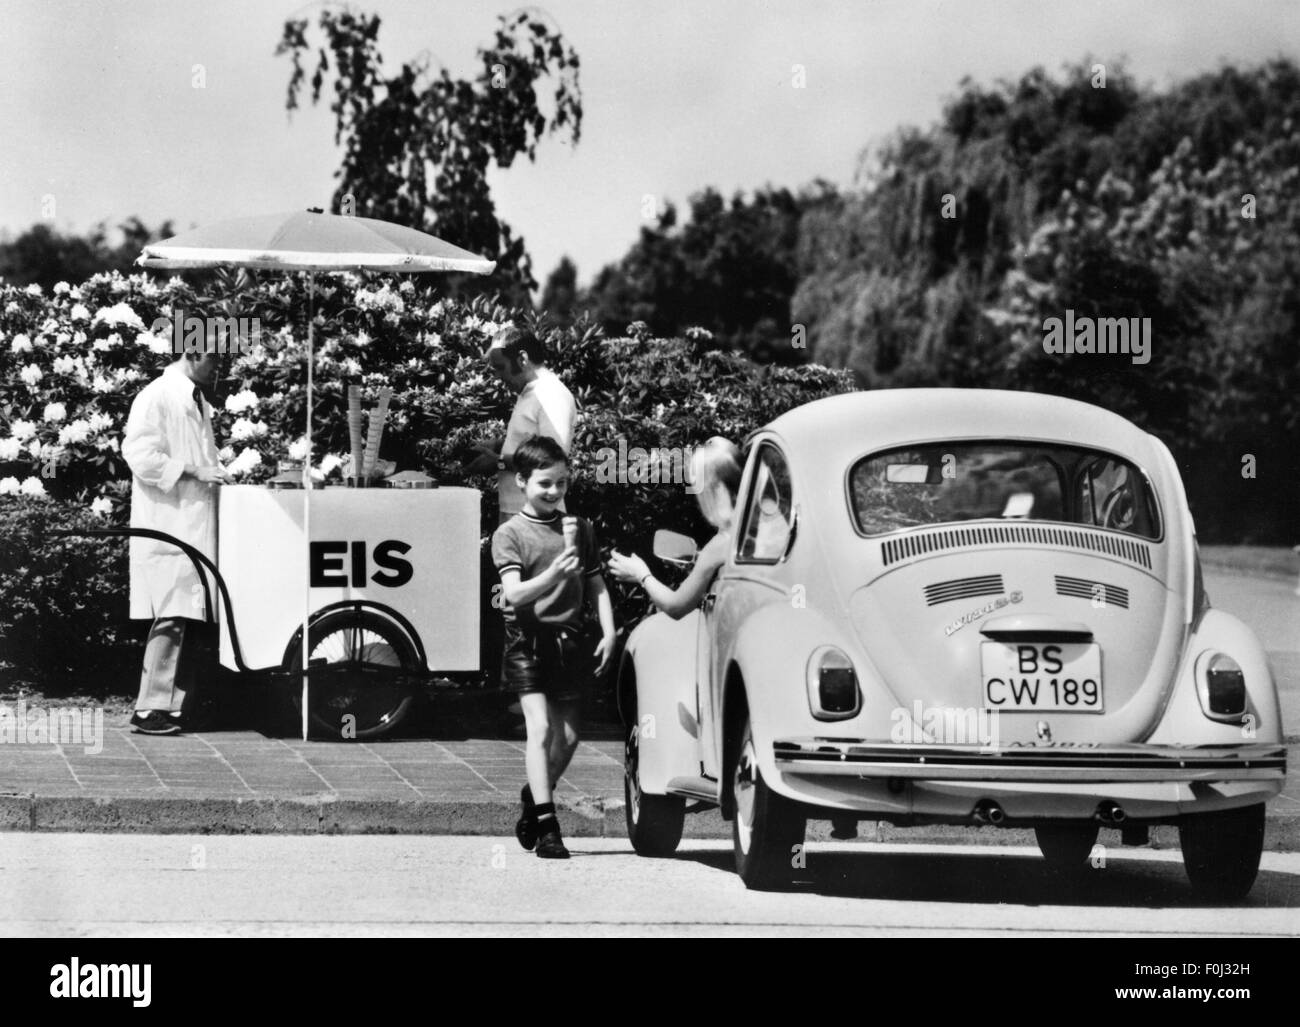 transport / transportation, car, vehicle variants, Volkswagen, VW 1302 beetle, in front of ice cream stand, 1970, Additional-Rights-Clearences-Not Available Stock Photo